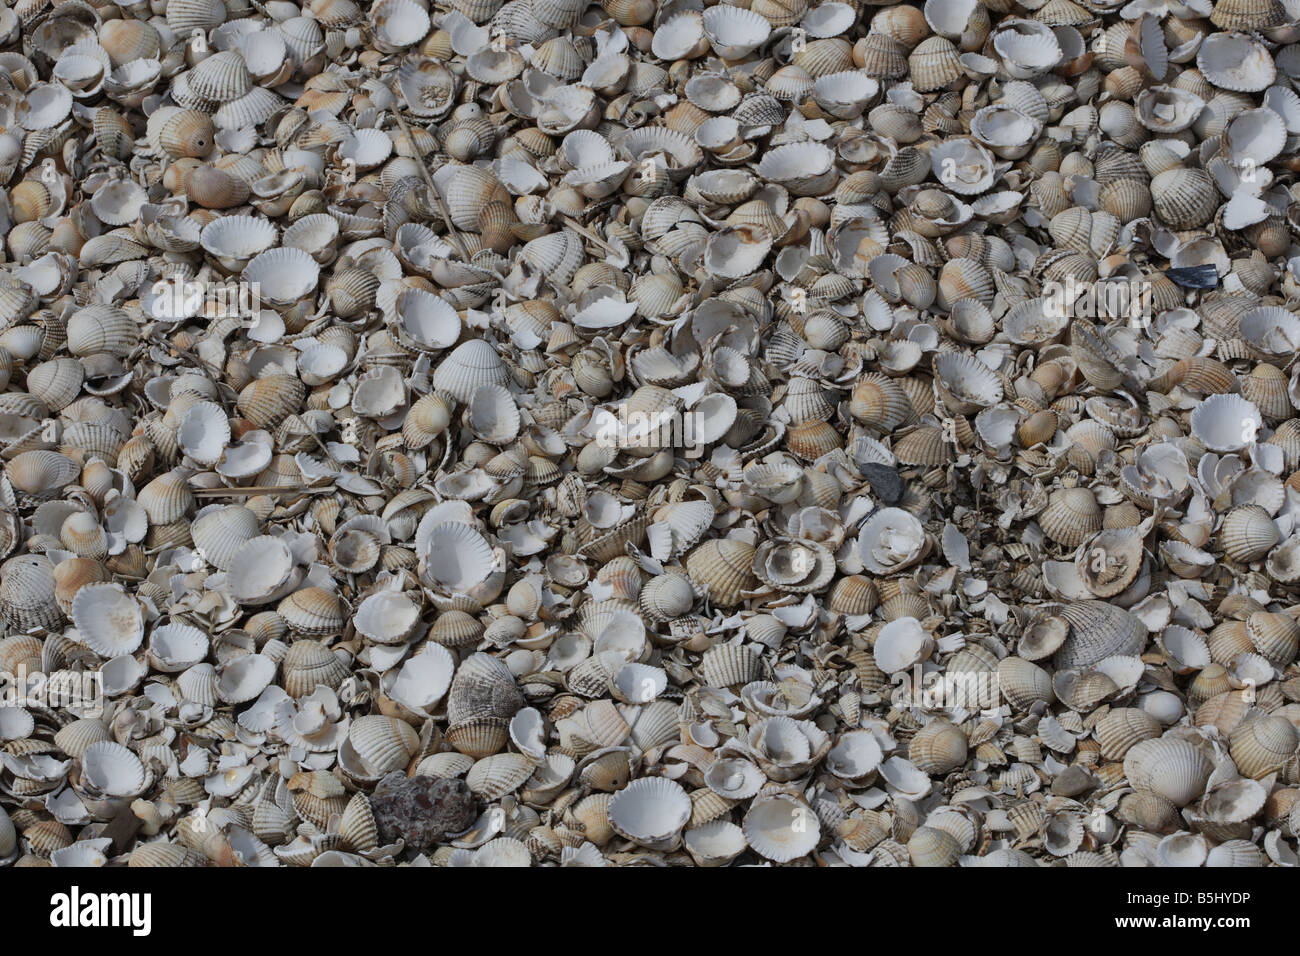 USING SEASHELLS AS A MULCH FOR WEED CONTROL Stock Photo